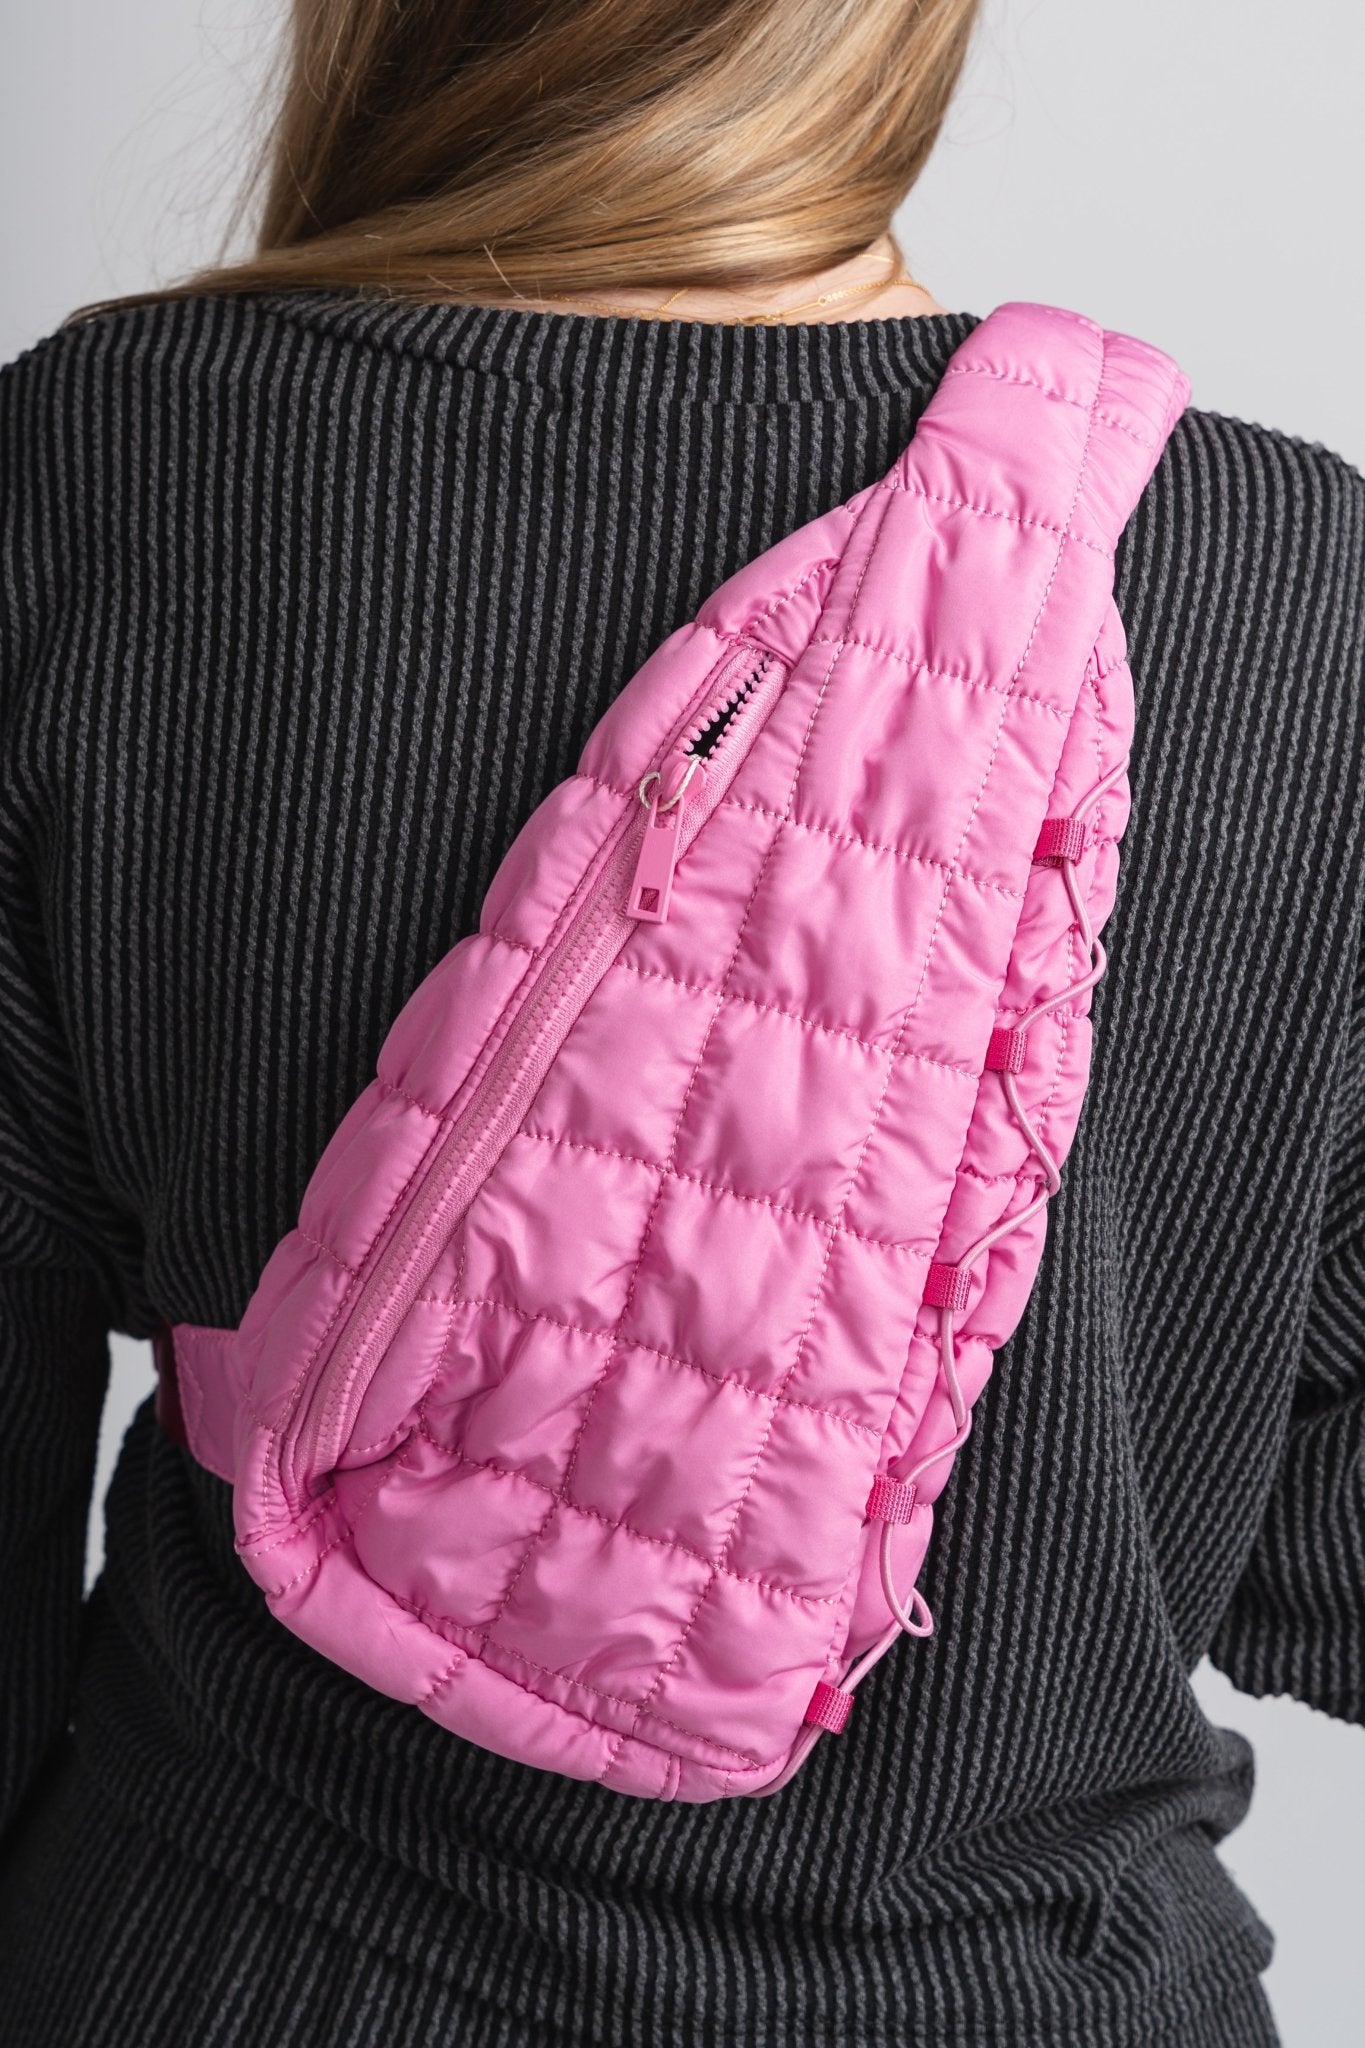 Quilted sling bag pink - Trendy Bags at Lush Fashion Lounge Boutique in Oklahoma City